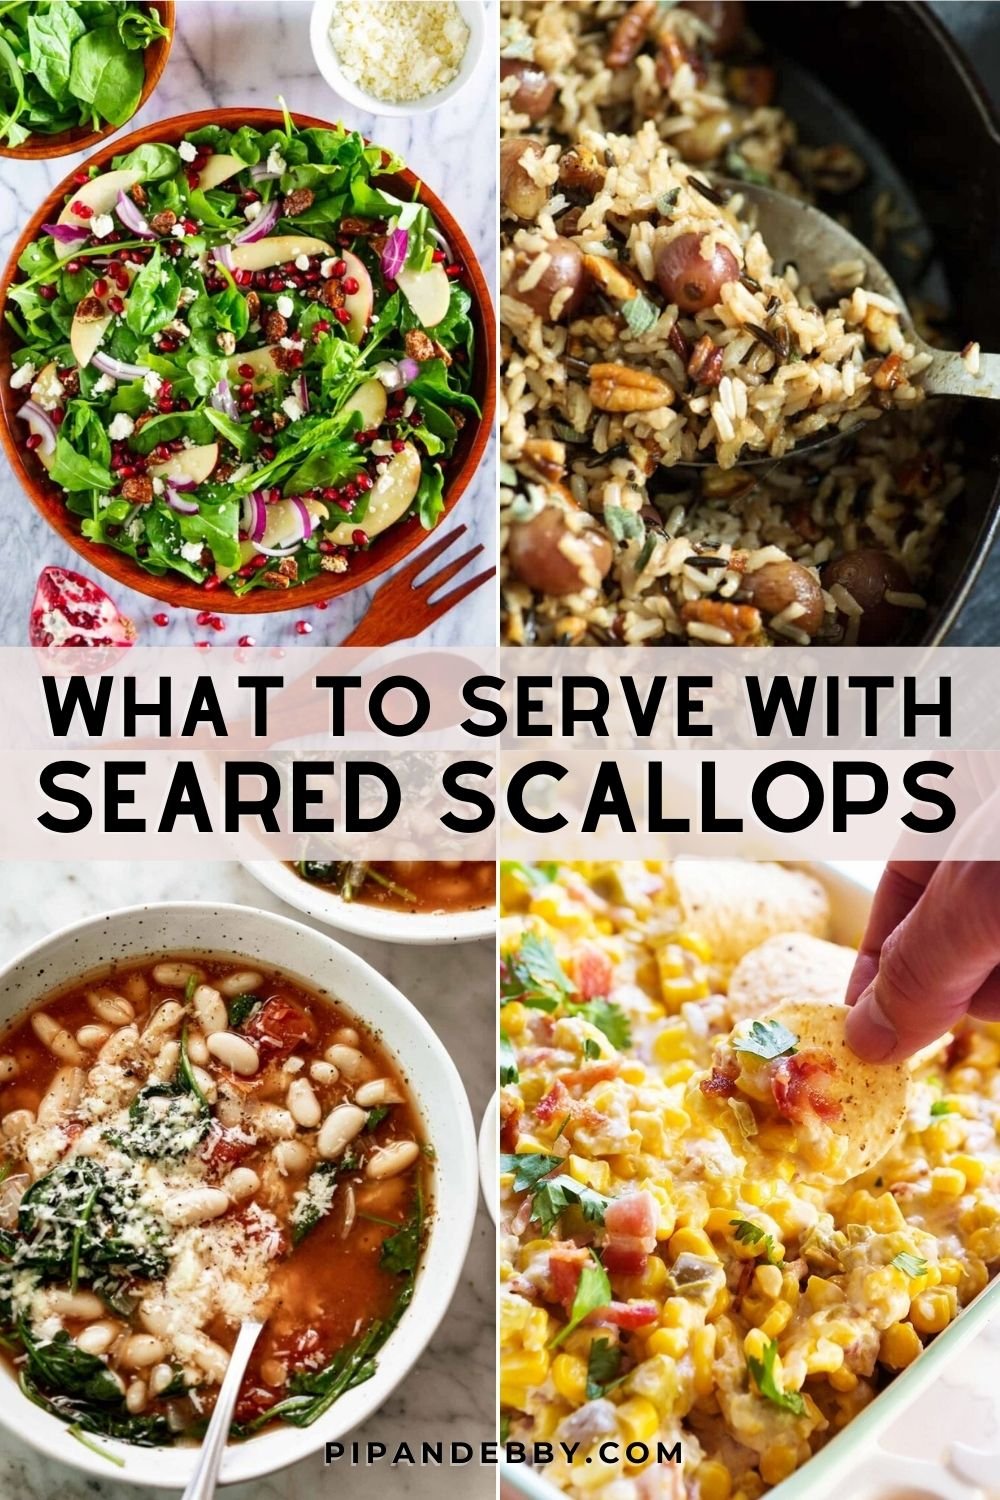 Four food photos in a grid, with text overlay reading, "What to serve with seared scallops."